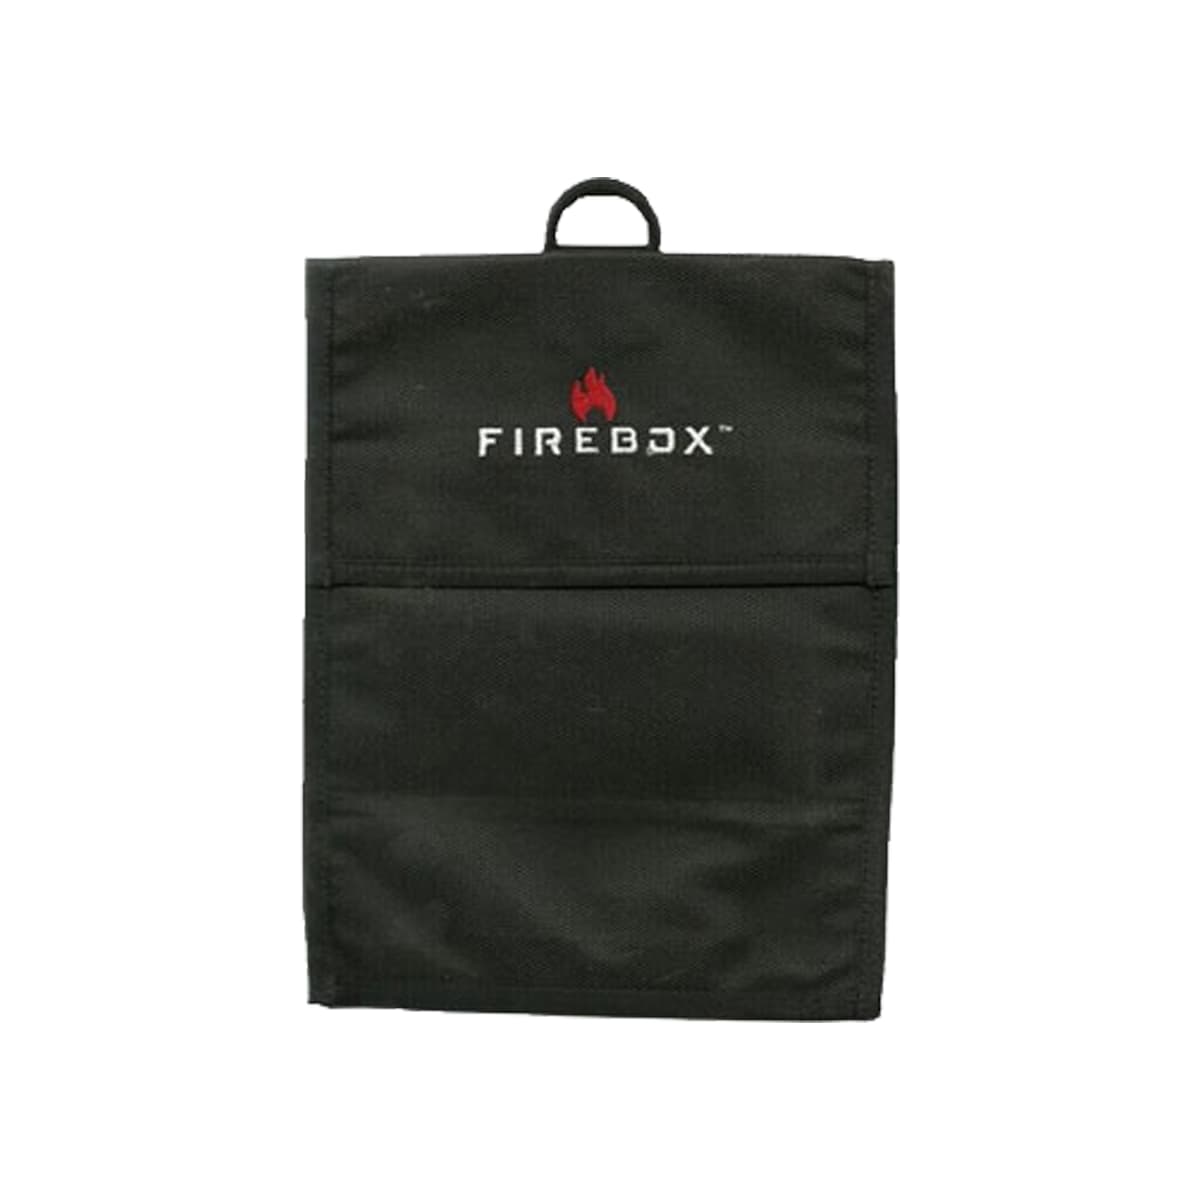 Firebox Stove Carrying Case